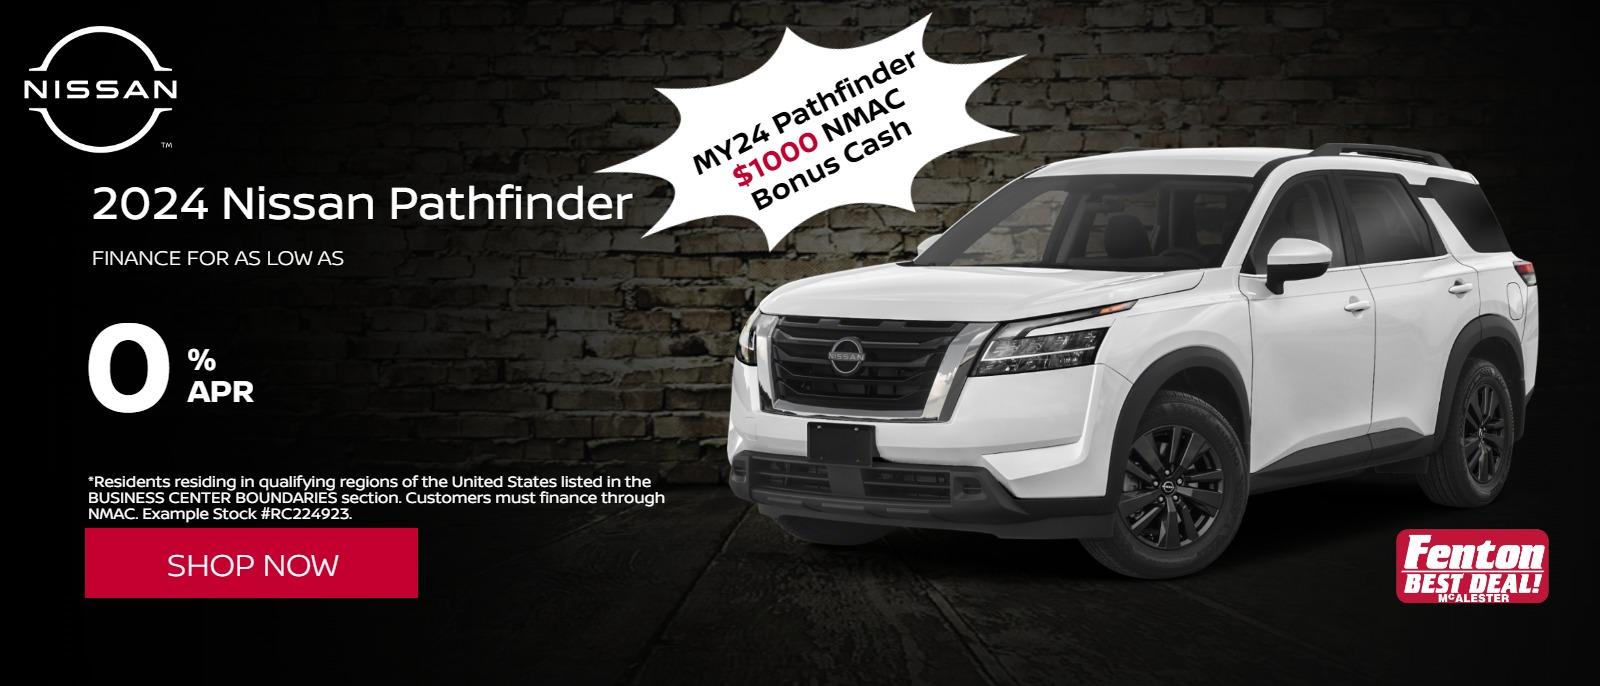 24 Frontier
0% APR
 Financing available on 2024 Nissan Pathfinder
*Residents residing in qualifying regions of the United States listed in the BUSINESS CENTER BOUNDARIES section. Customers must finance through NMAC